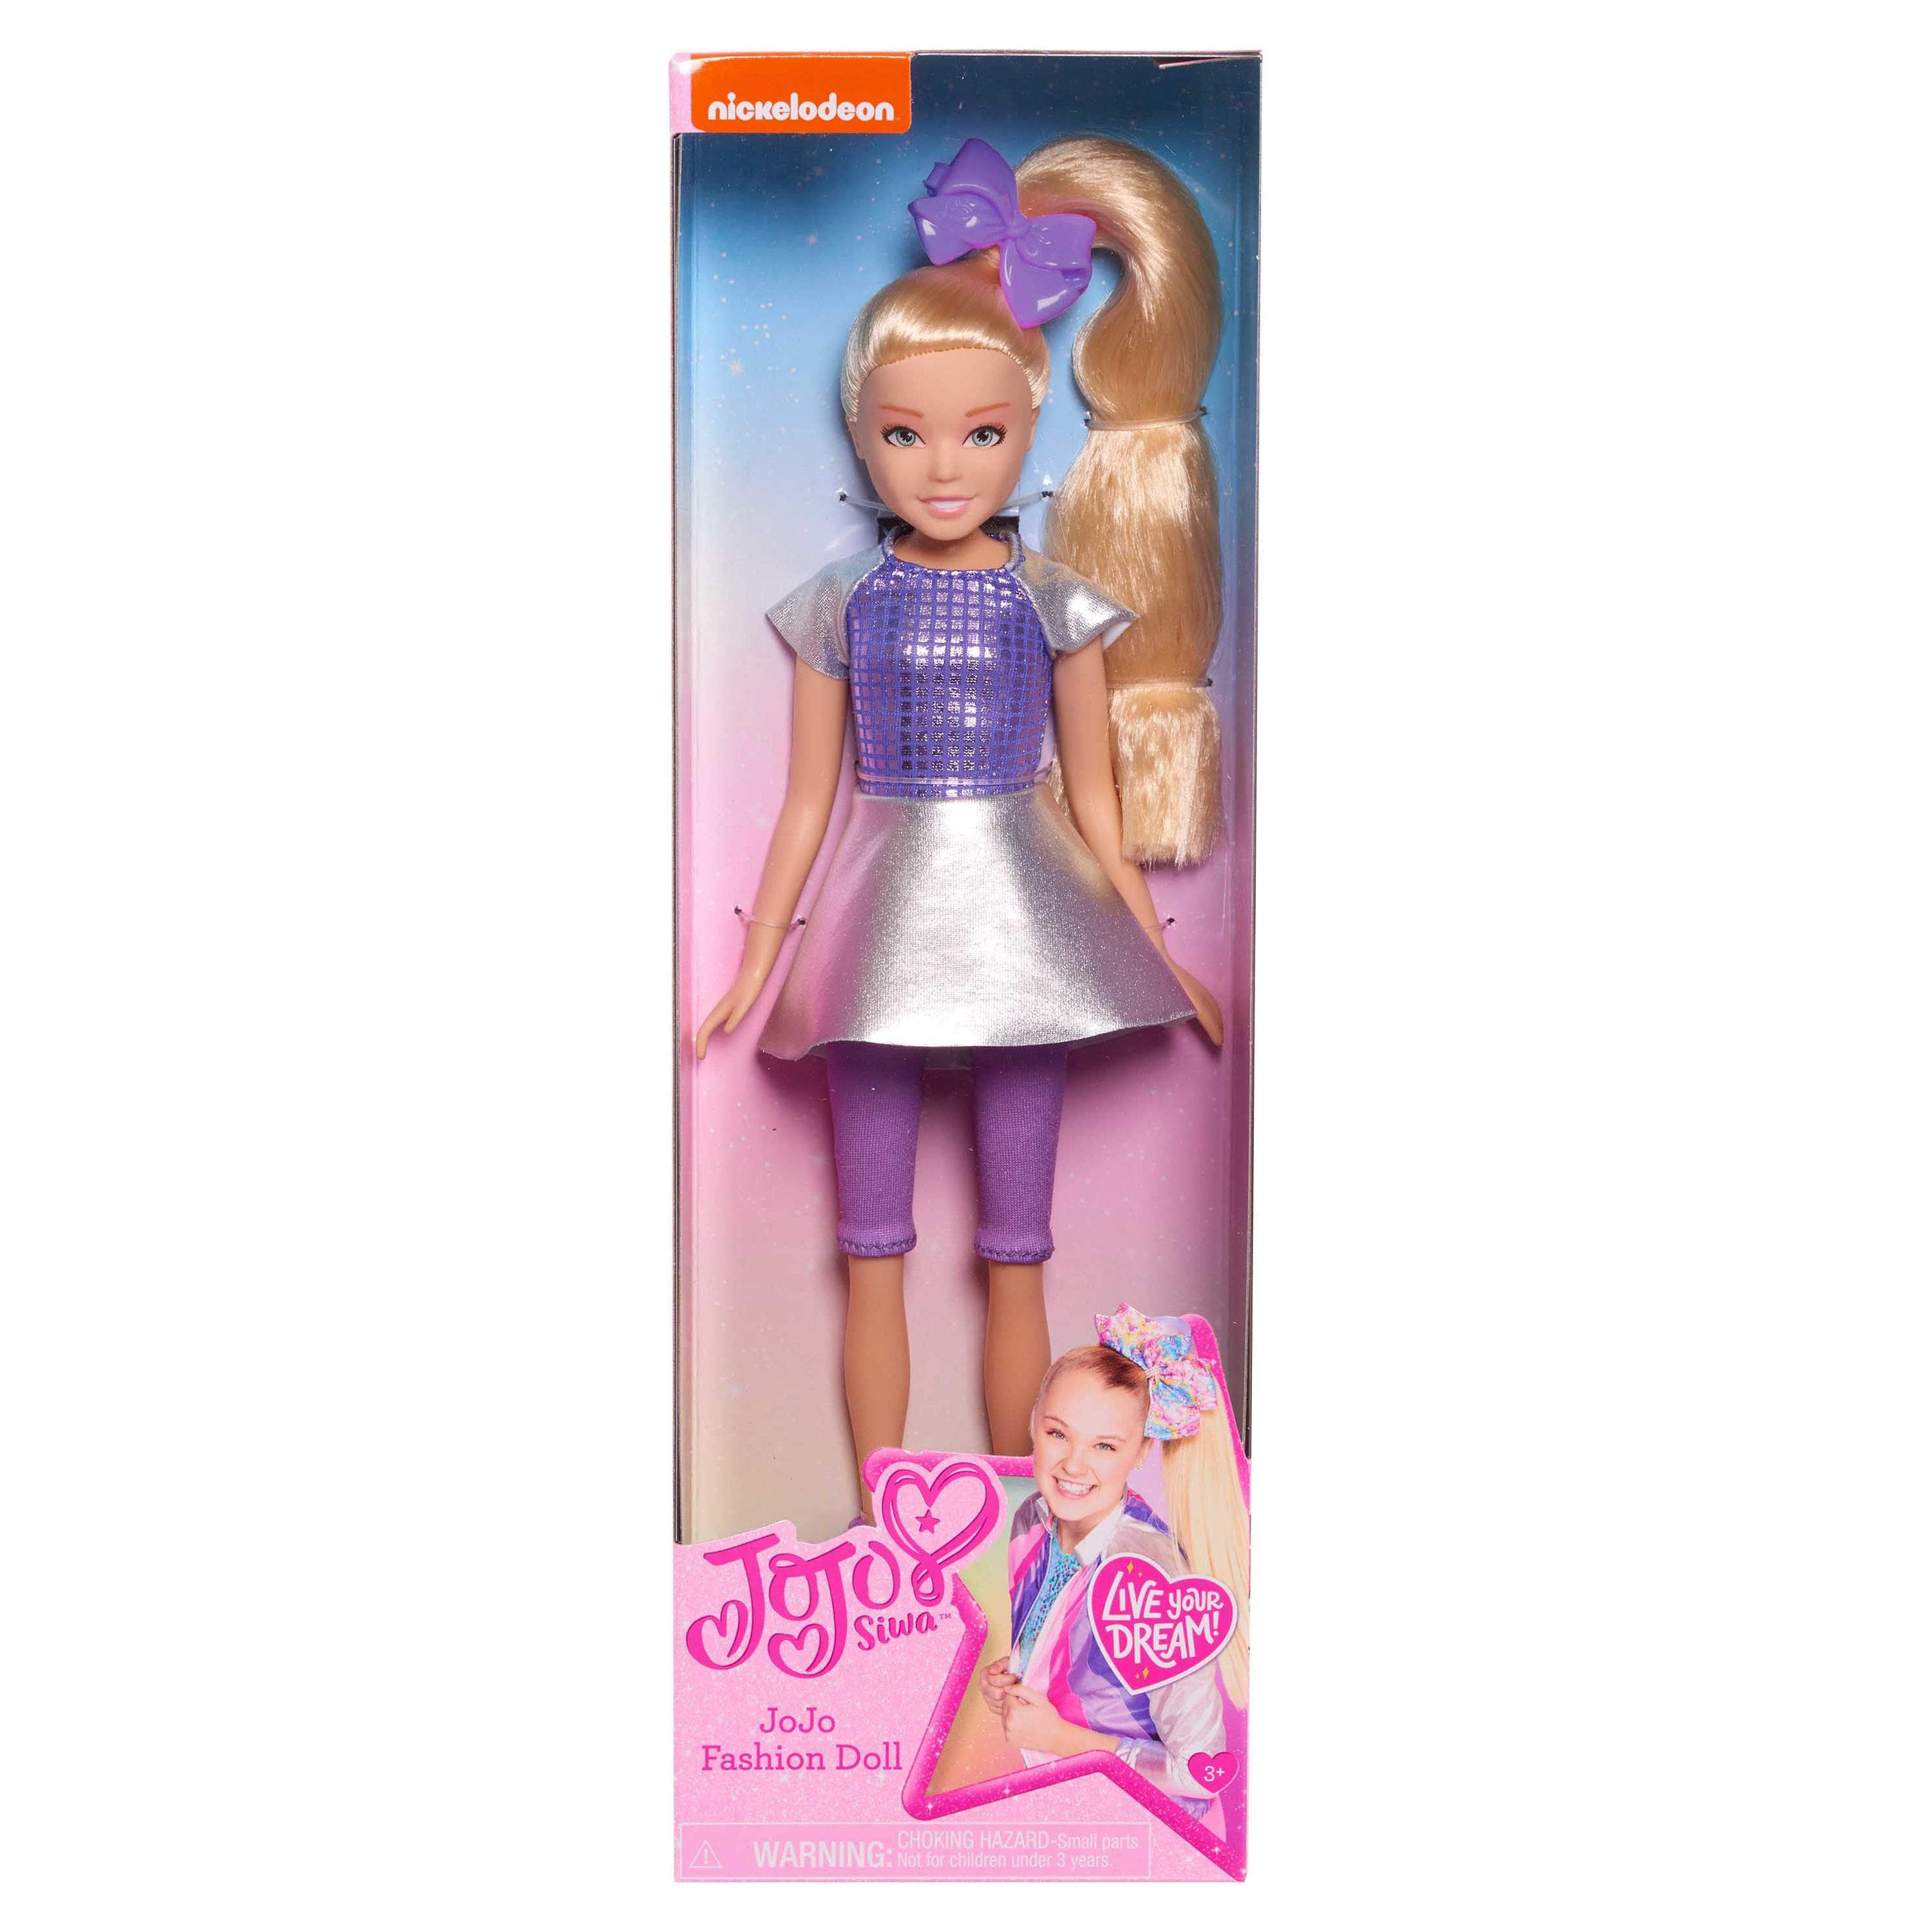 JoJo Siwa Fashion Doll, Out of this World, 10-inch doll,  Kids Toys for Ages 3 Up, Gifts and Presents - image 3 of 3